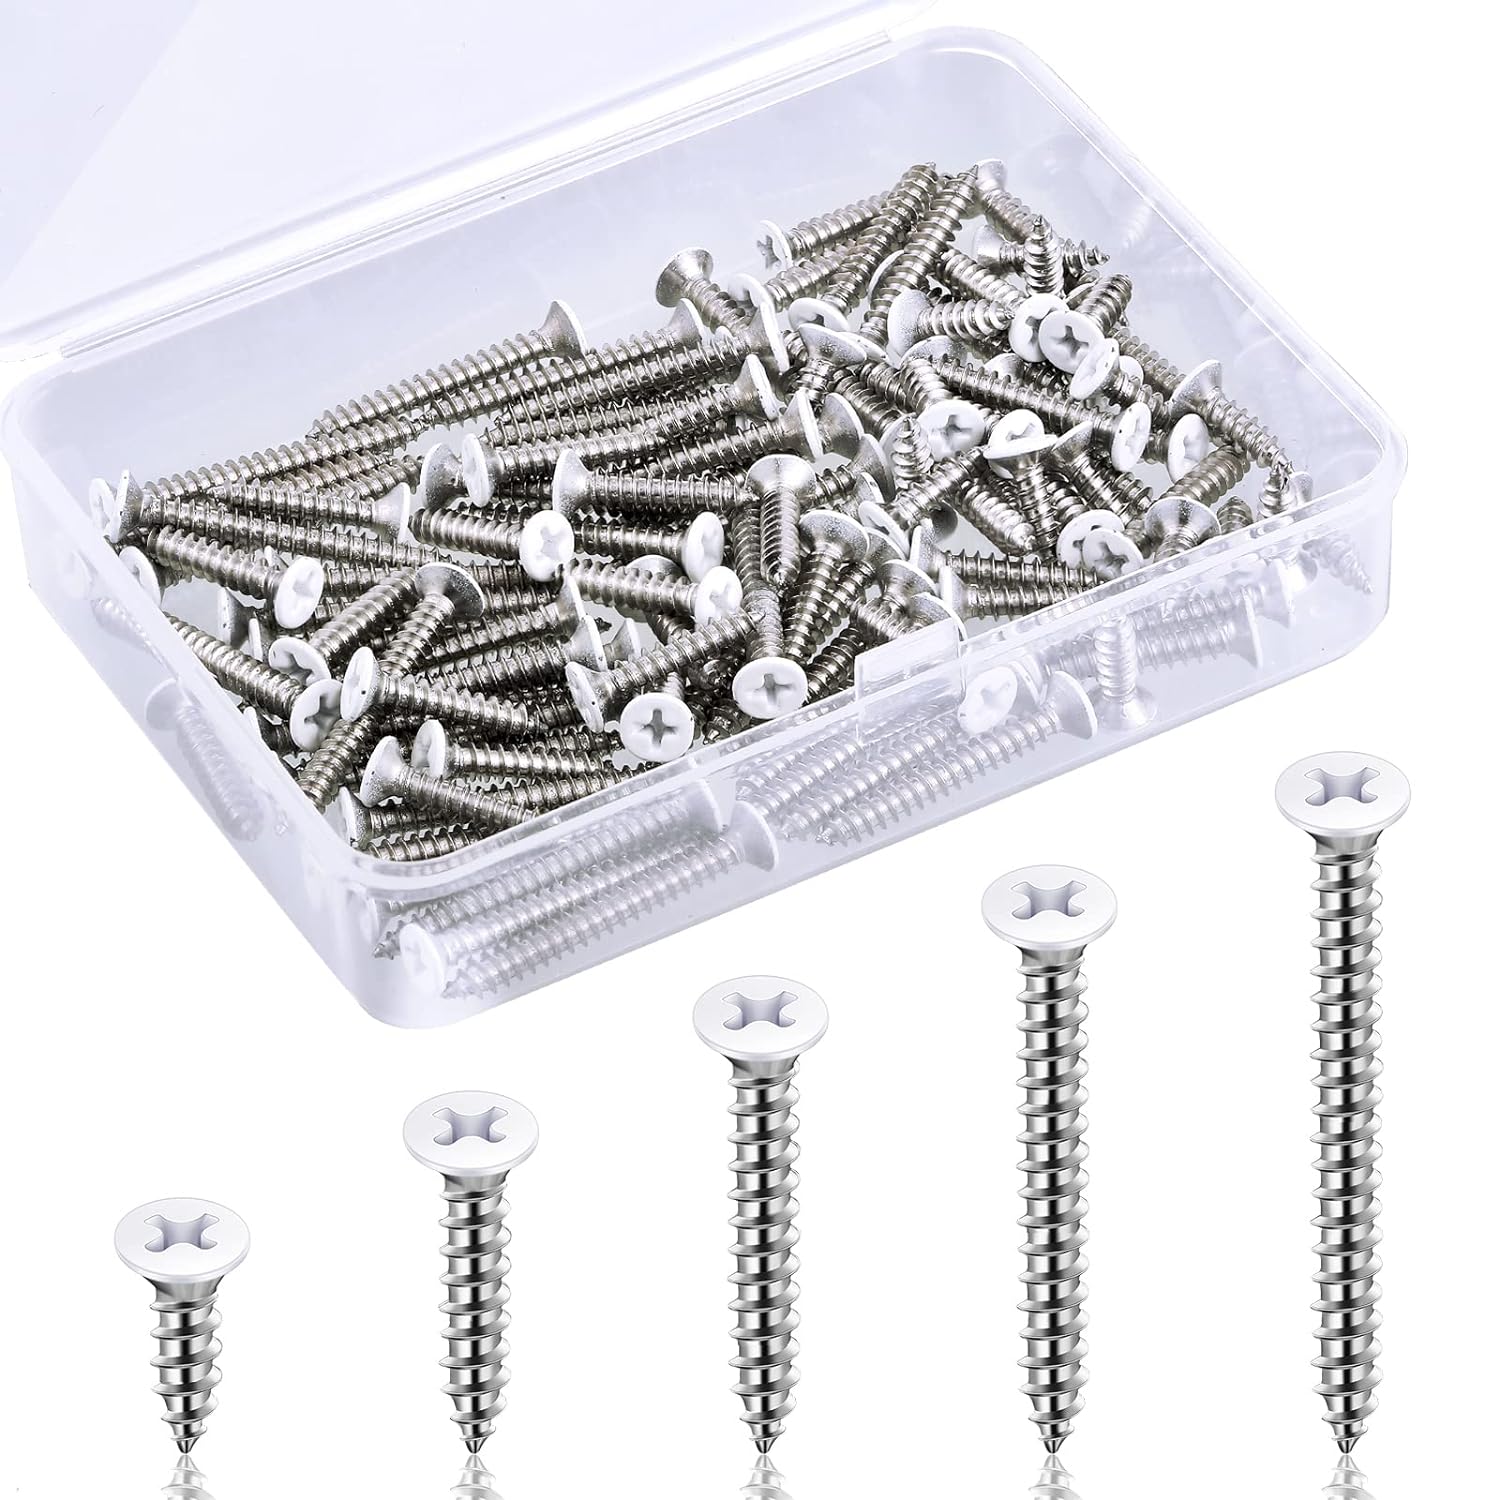 Generic 100 Pcs 5 Size #8 White Screws White Head Screws White Screws Covers Head Wood Screws Wall Plate Screws Coated Stainless Steel